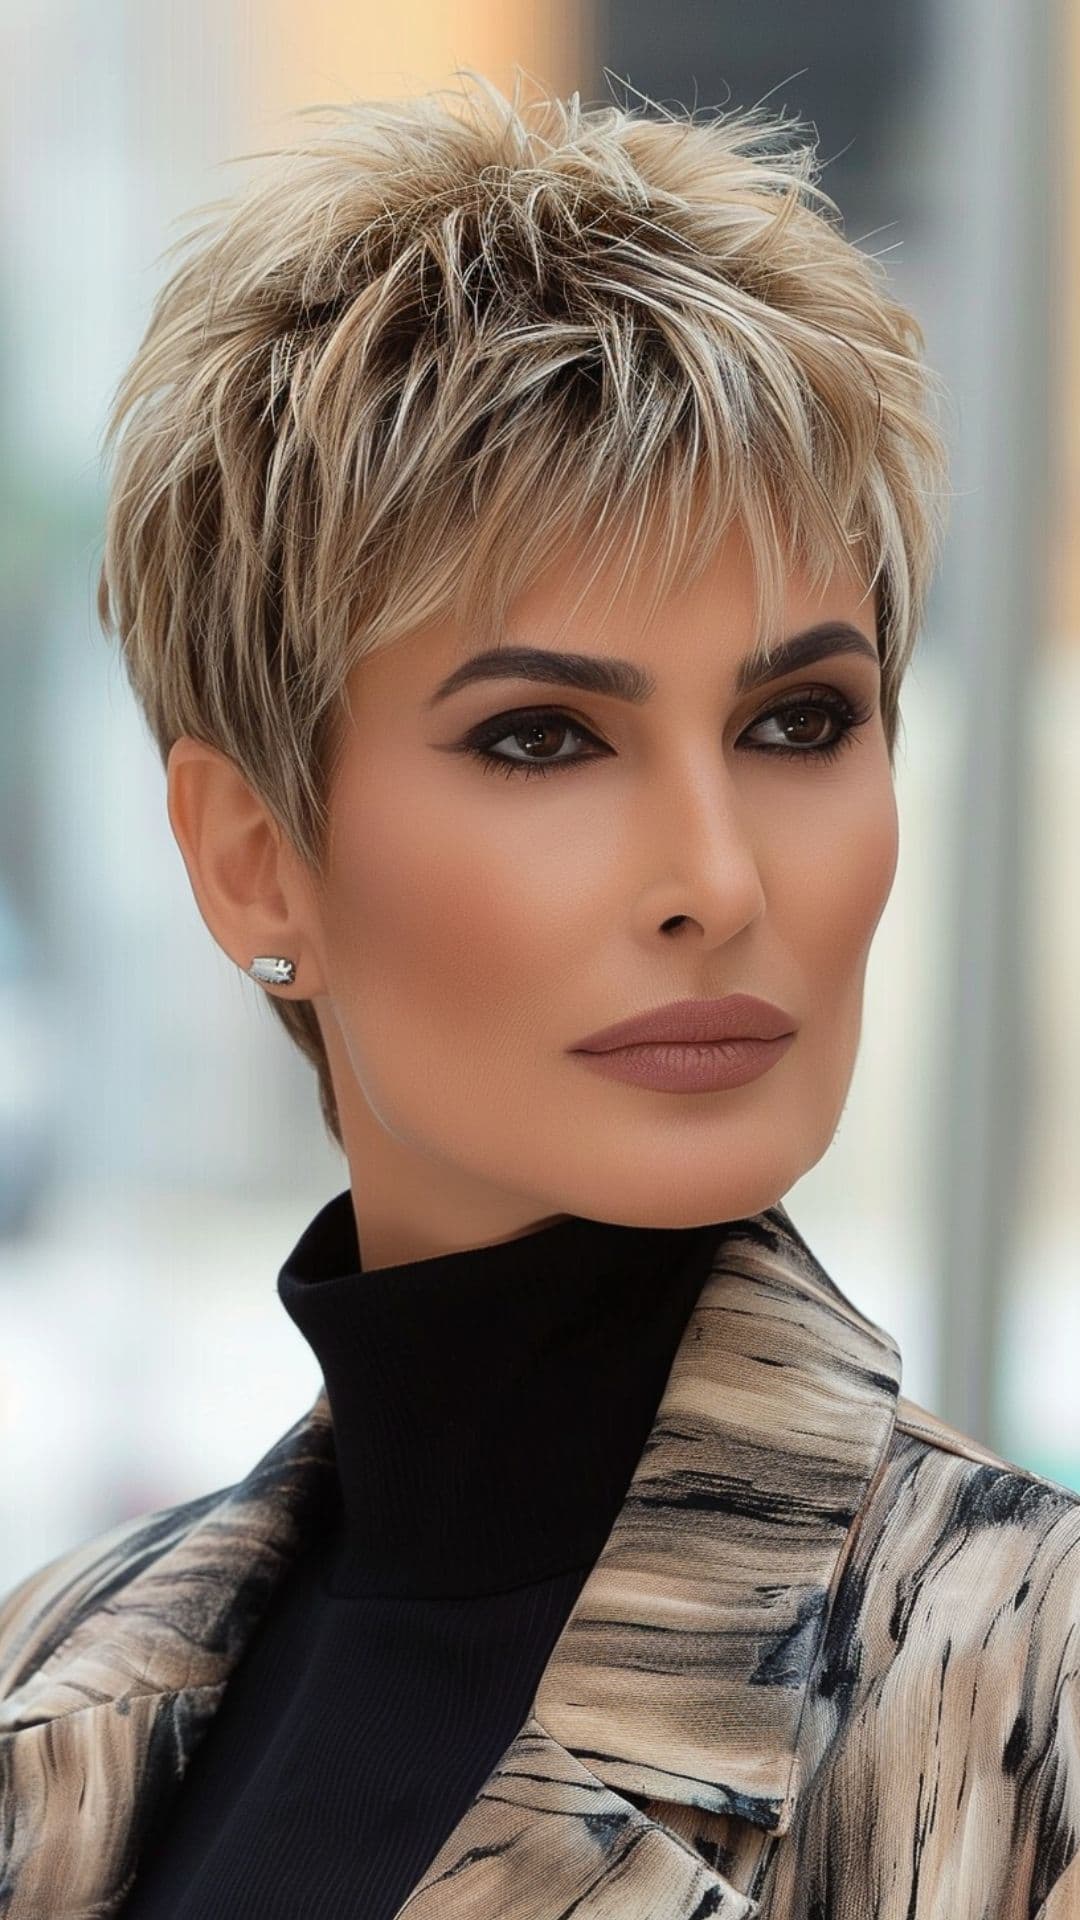 An older woman modelling a short and spiky pixie cut.